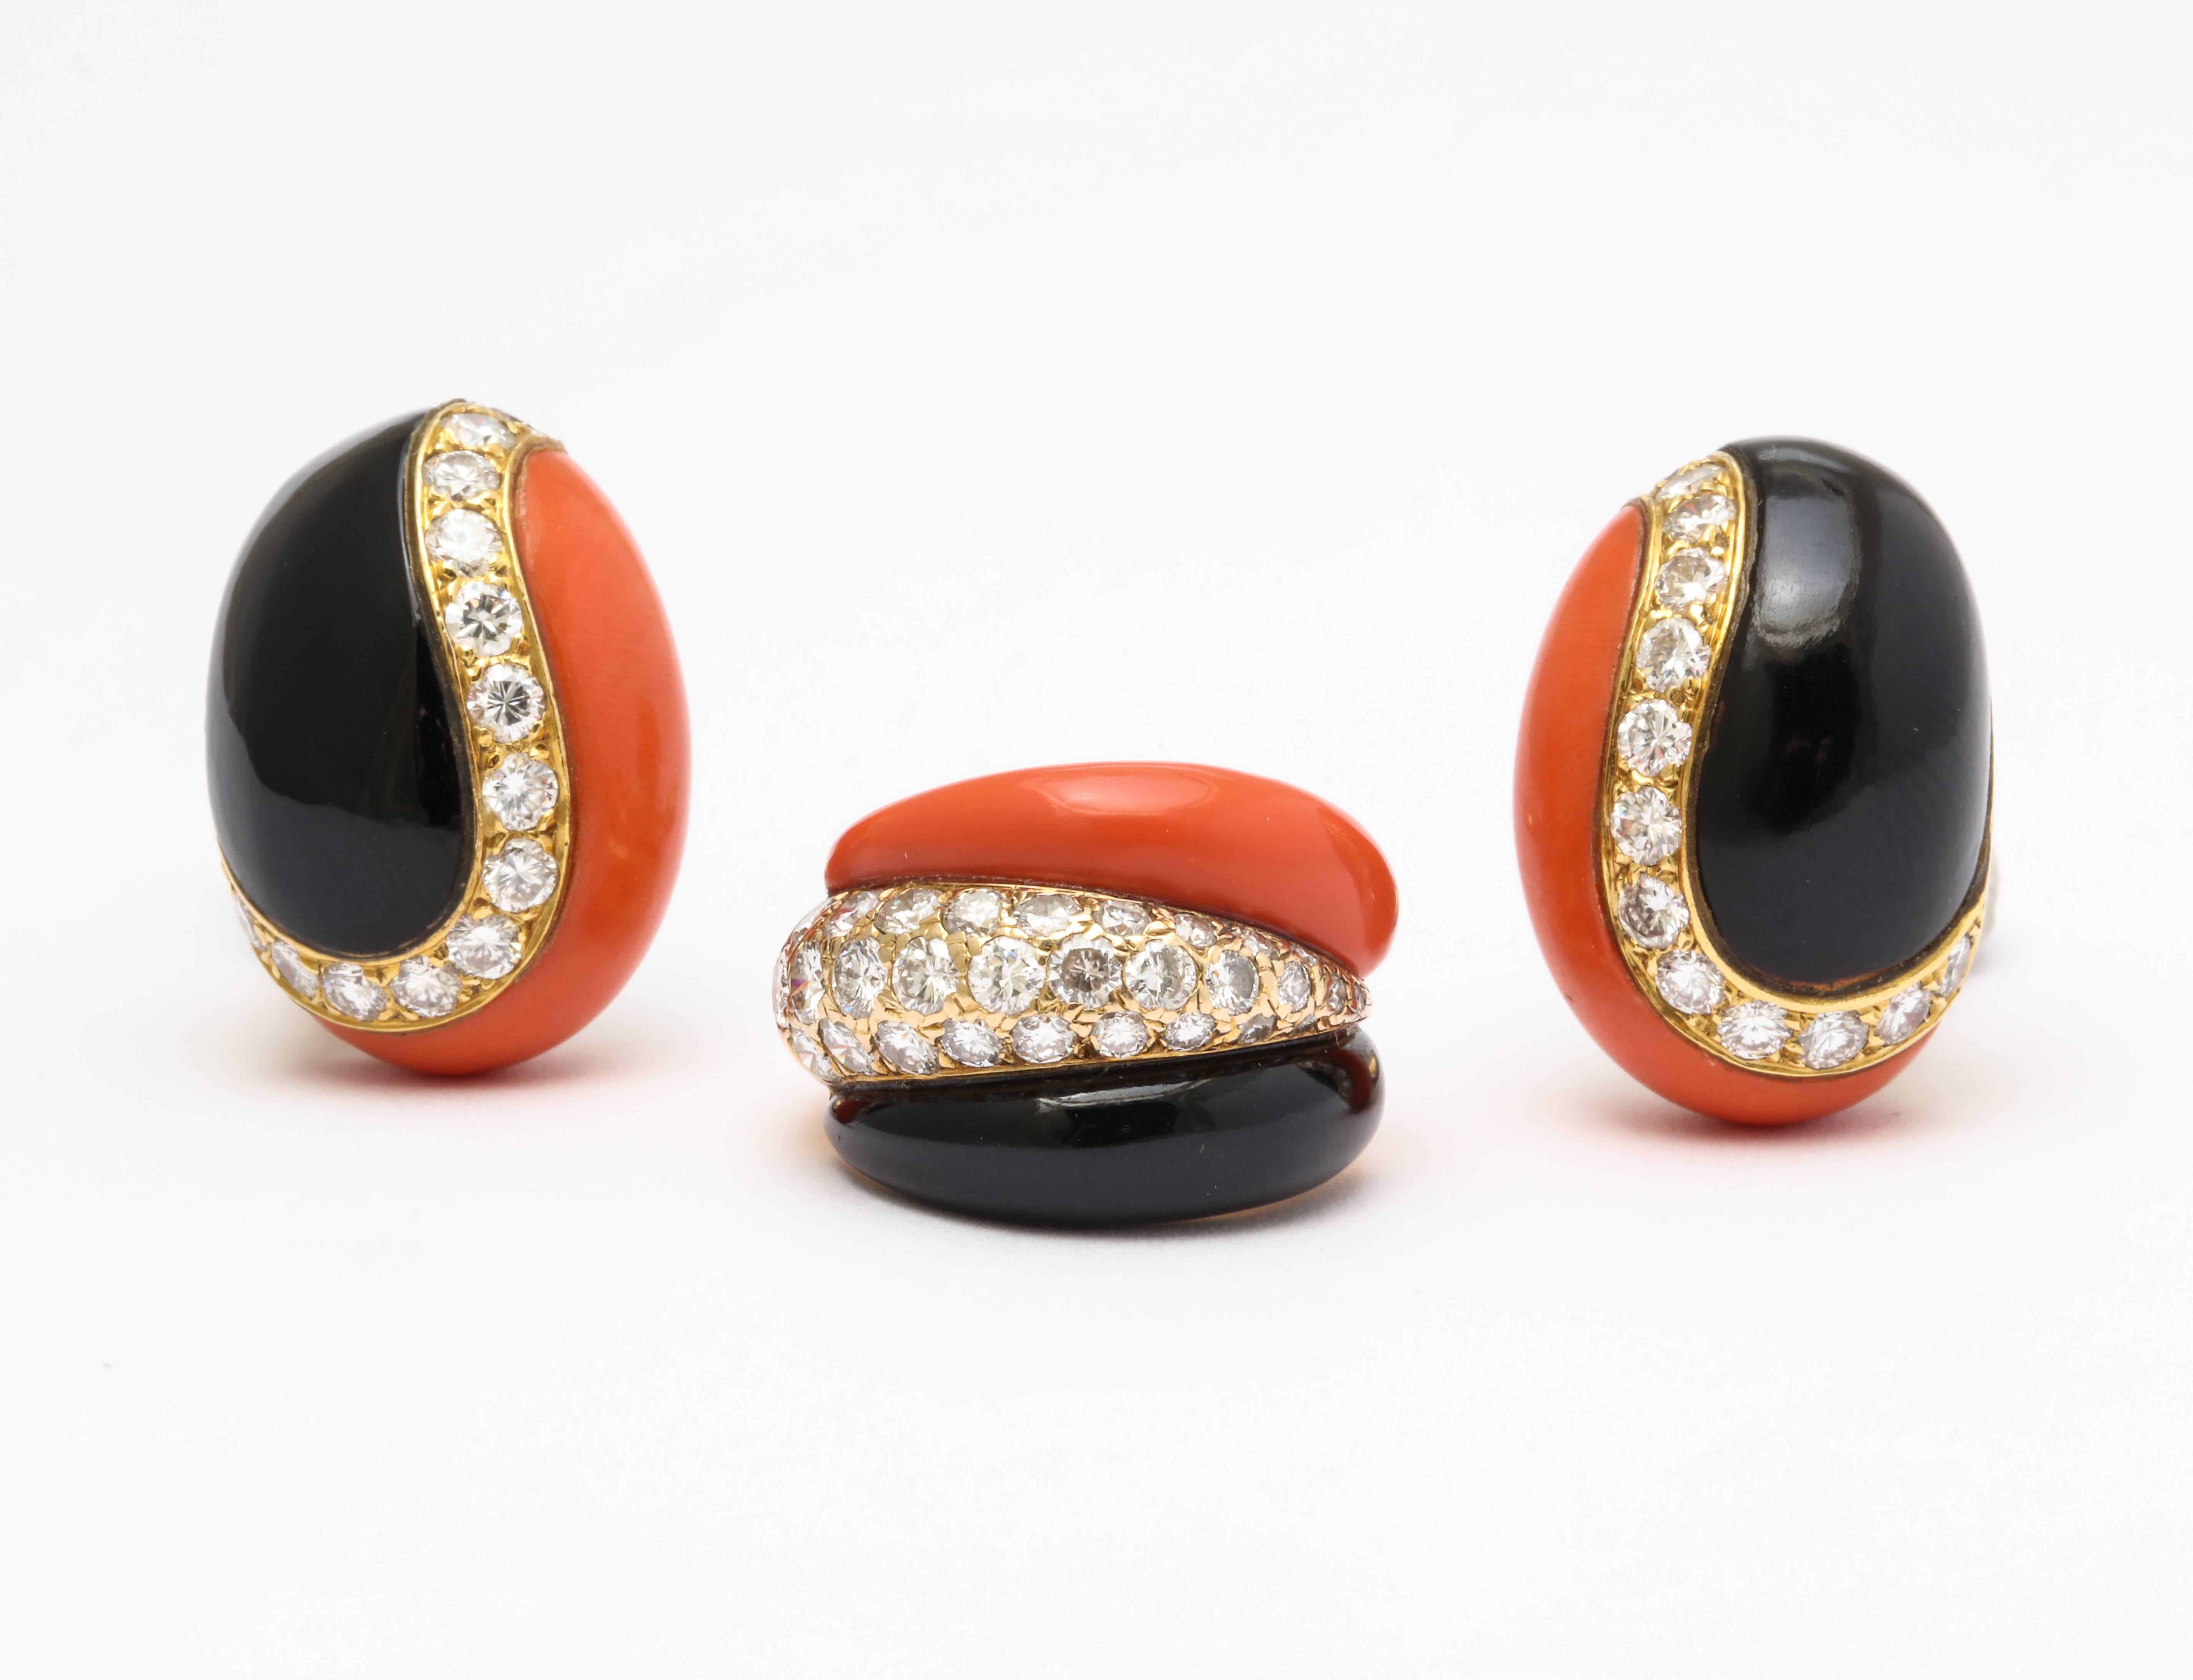 Coral Onyx and Diamond Earrings and Ring by Van Cleef and Arpels
Signed, serial numbered and French Marked
Made in France circa 1970